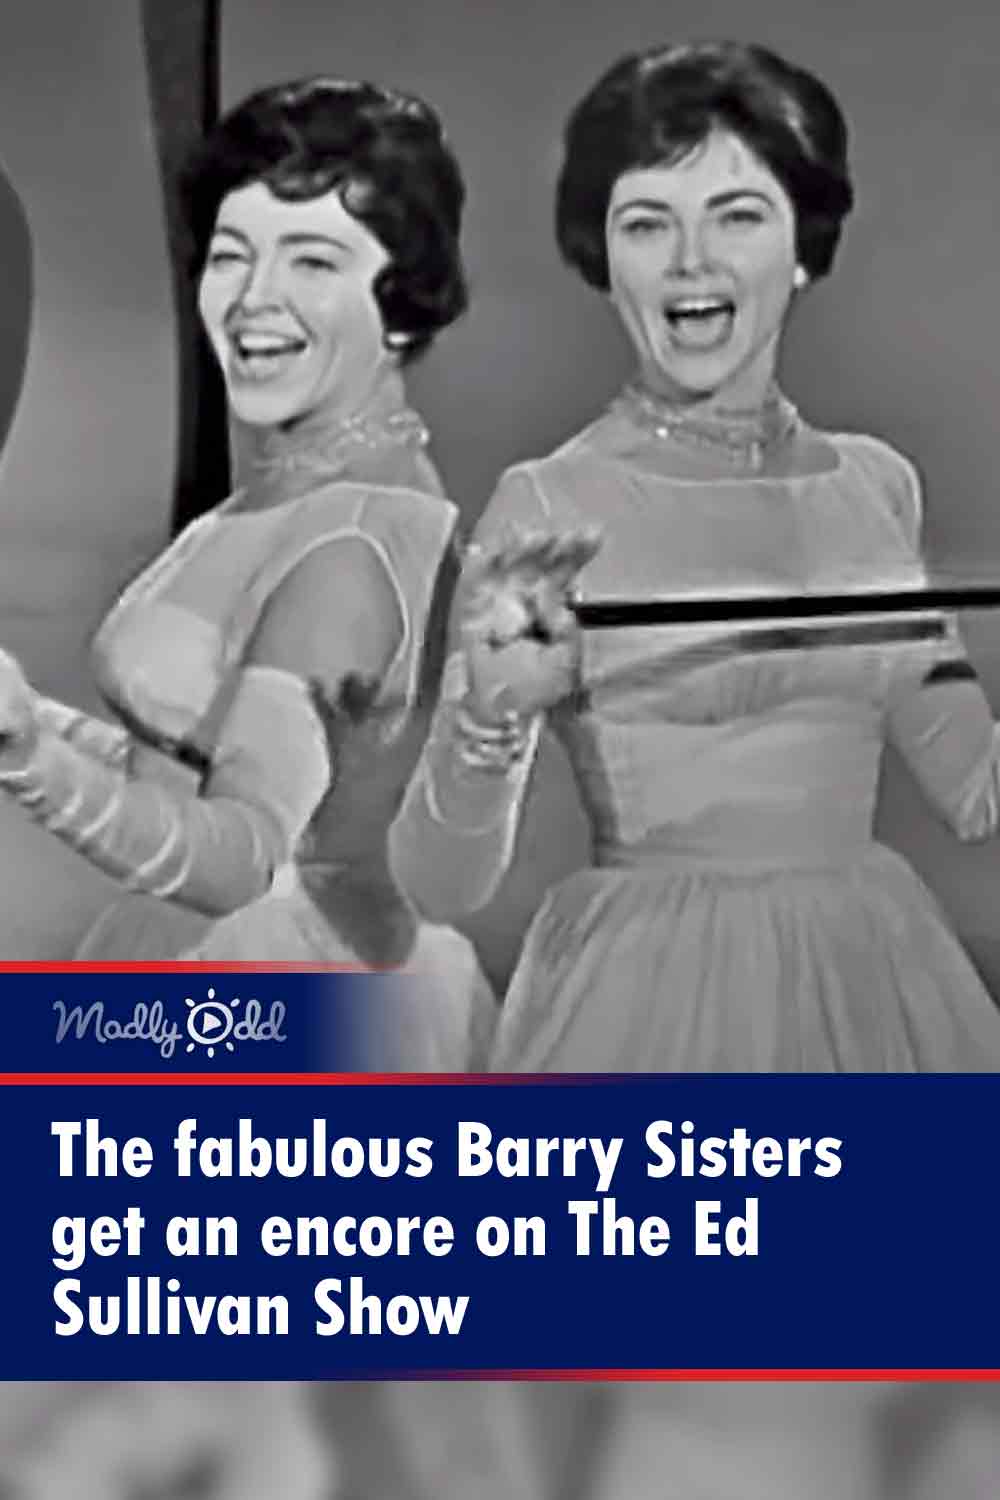 The fabulous Barry Sisters get an encore on The Ed Sullivan Show